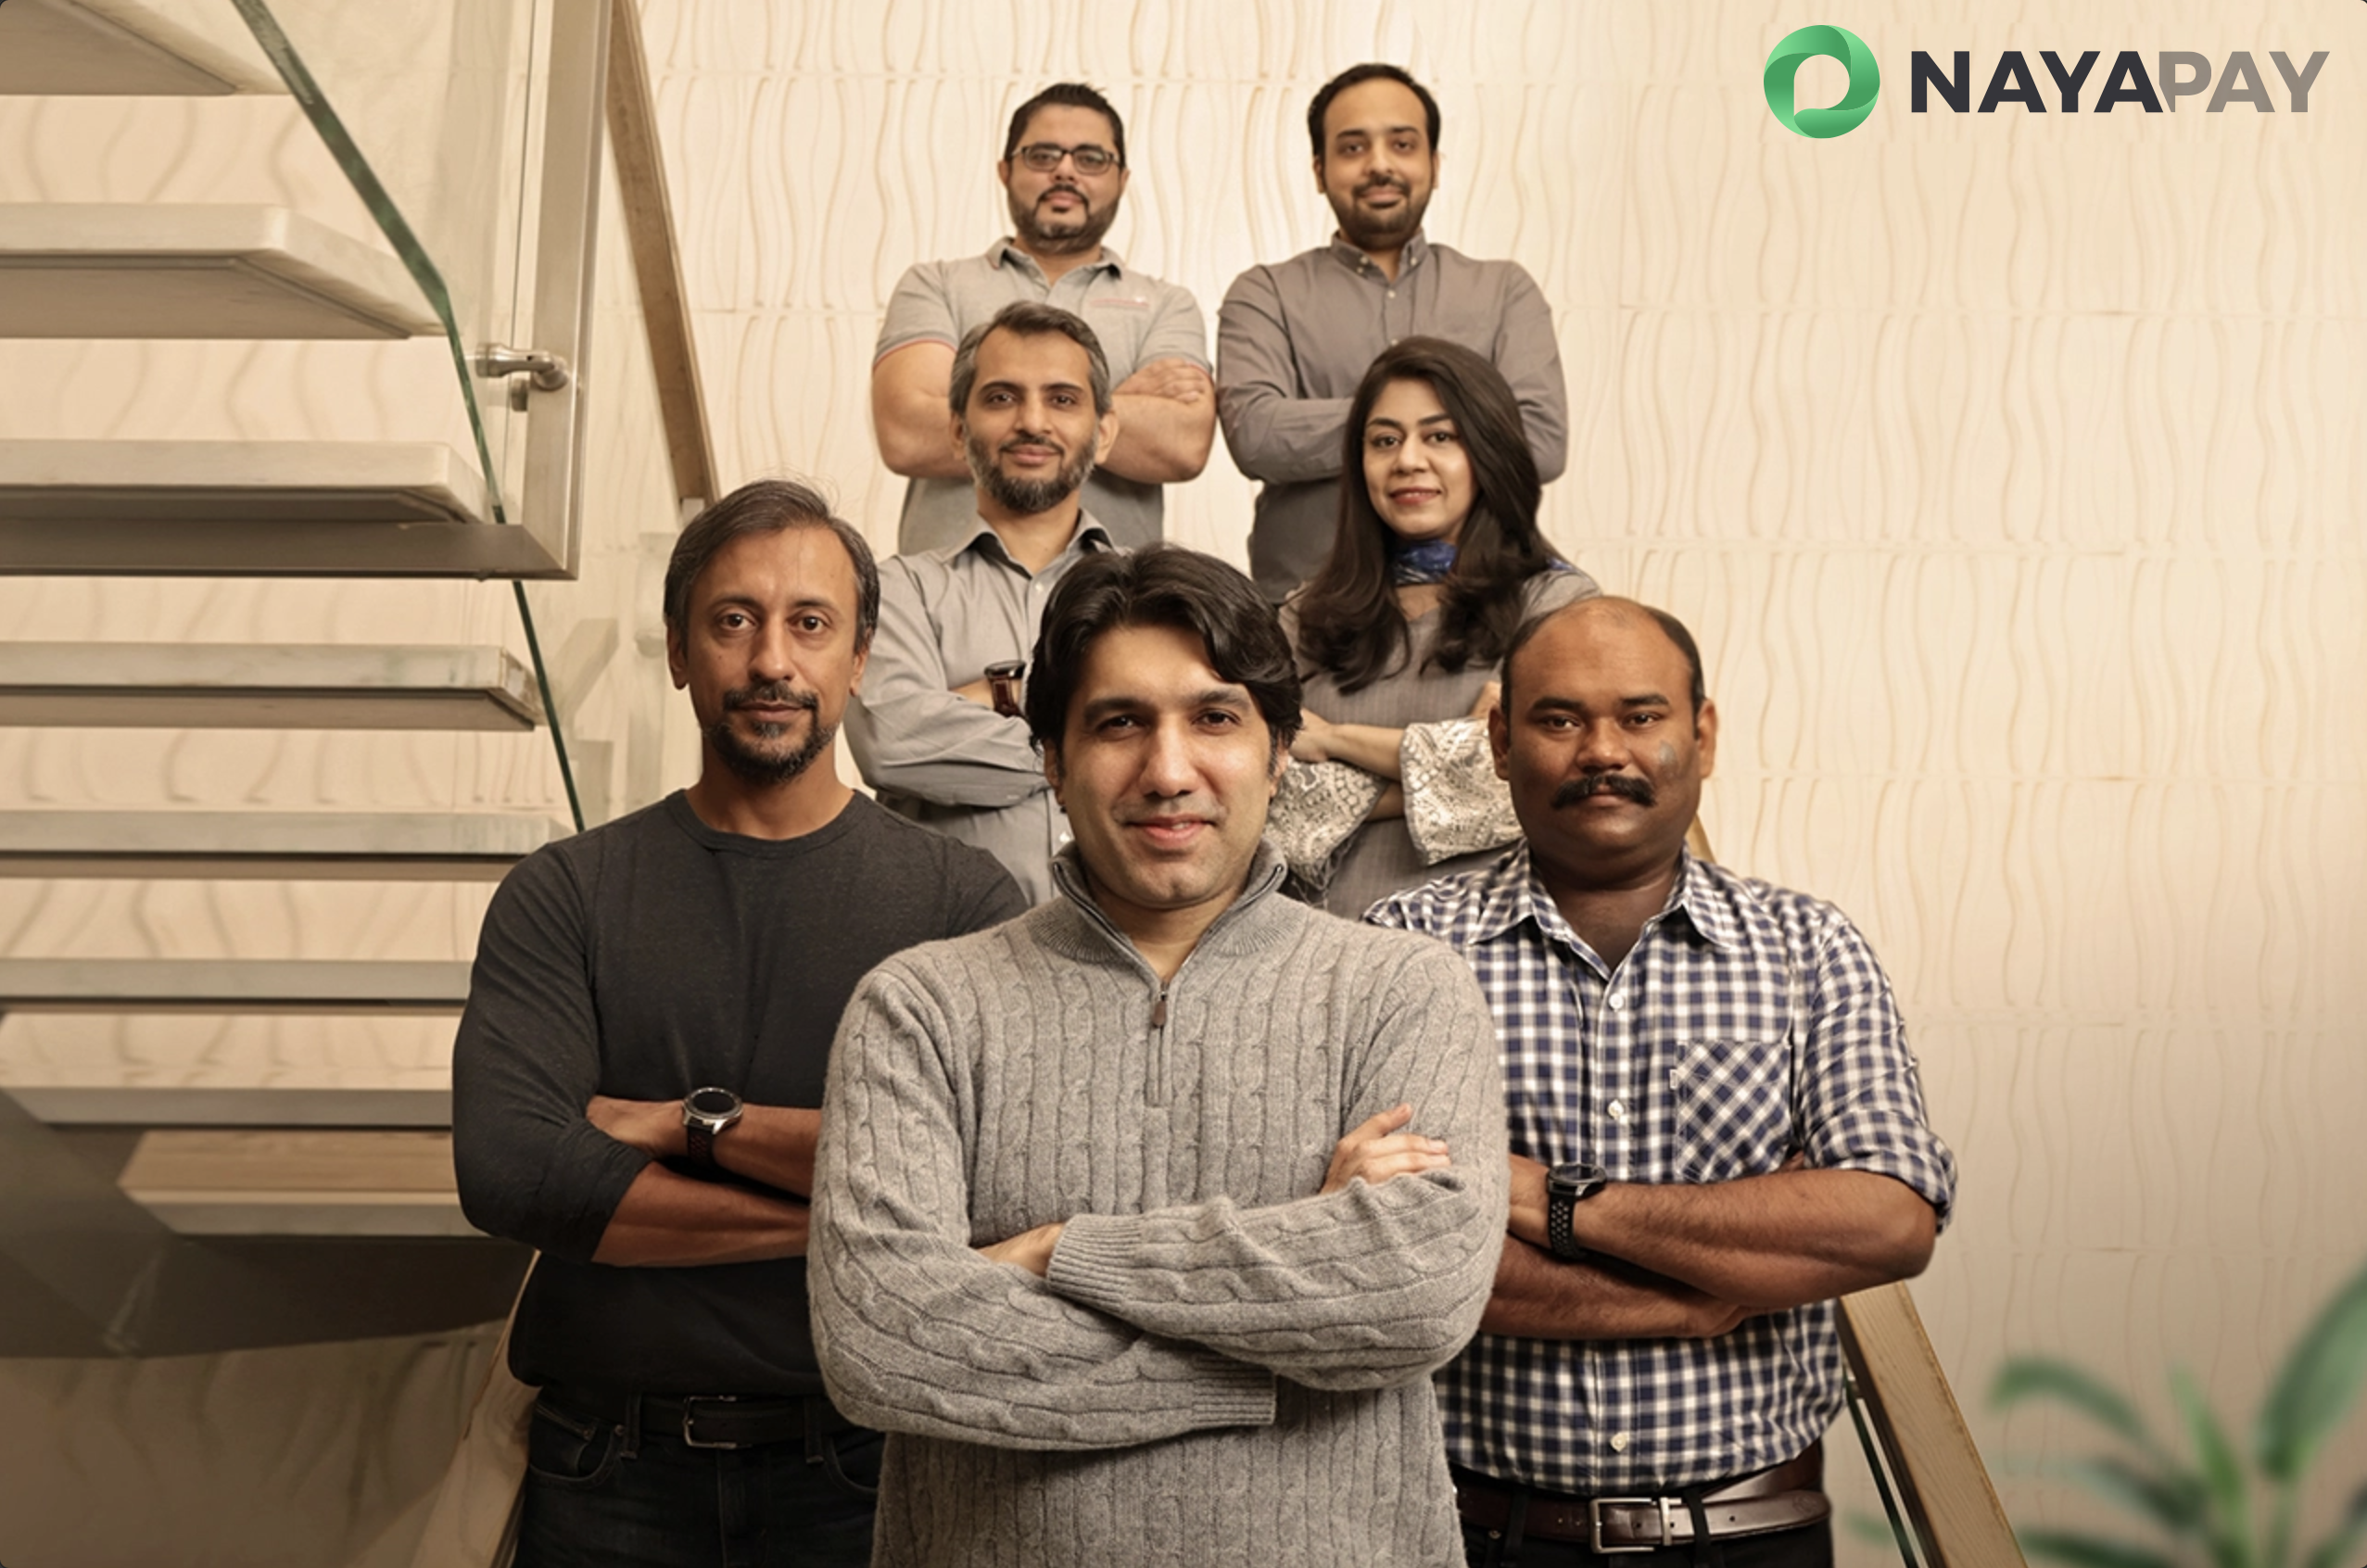 NayaPay secures $13m as it rolls out digital payments revolution in Pakistan